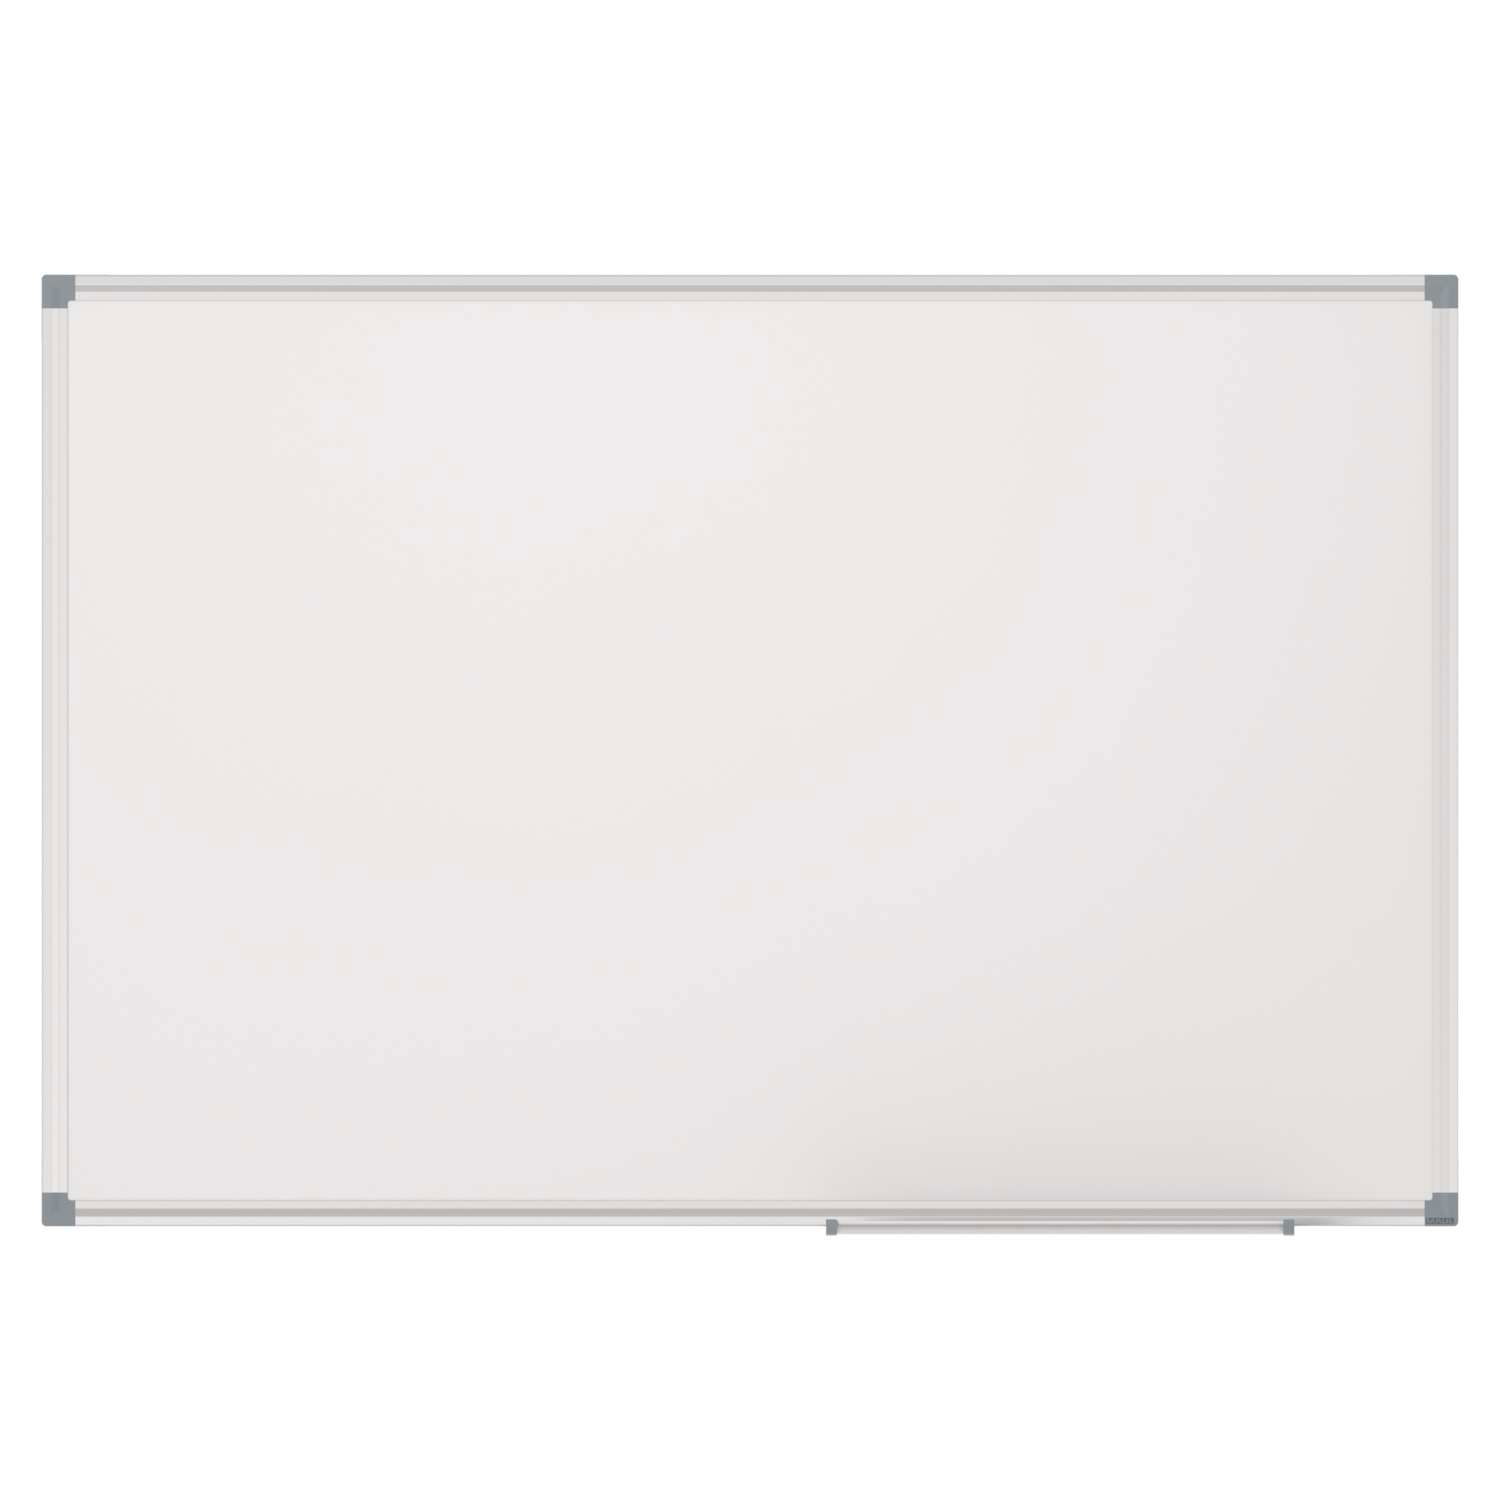 Whiteboard MAULstandard, Emaille, 120x240 cm